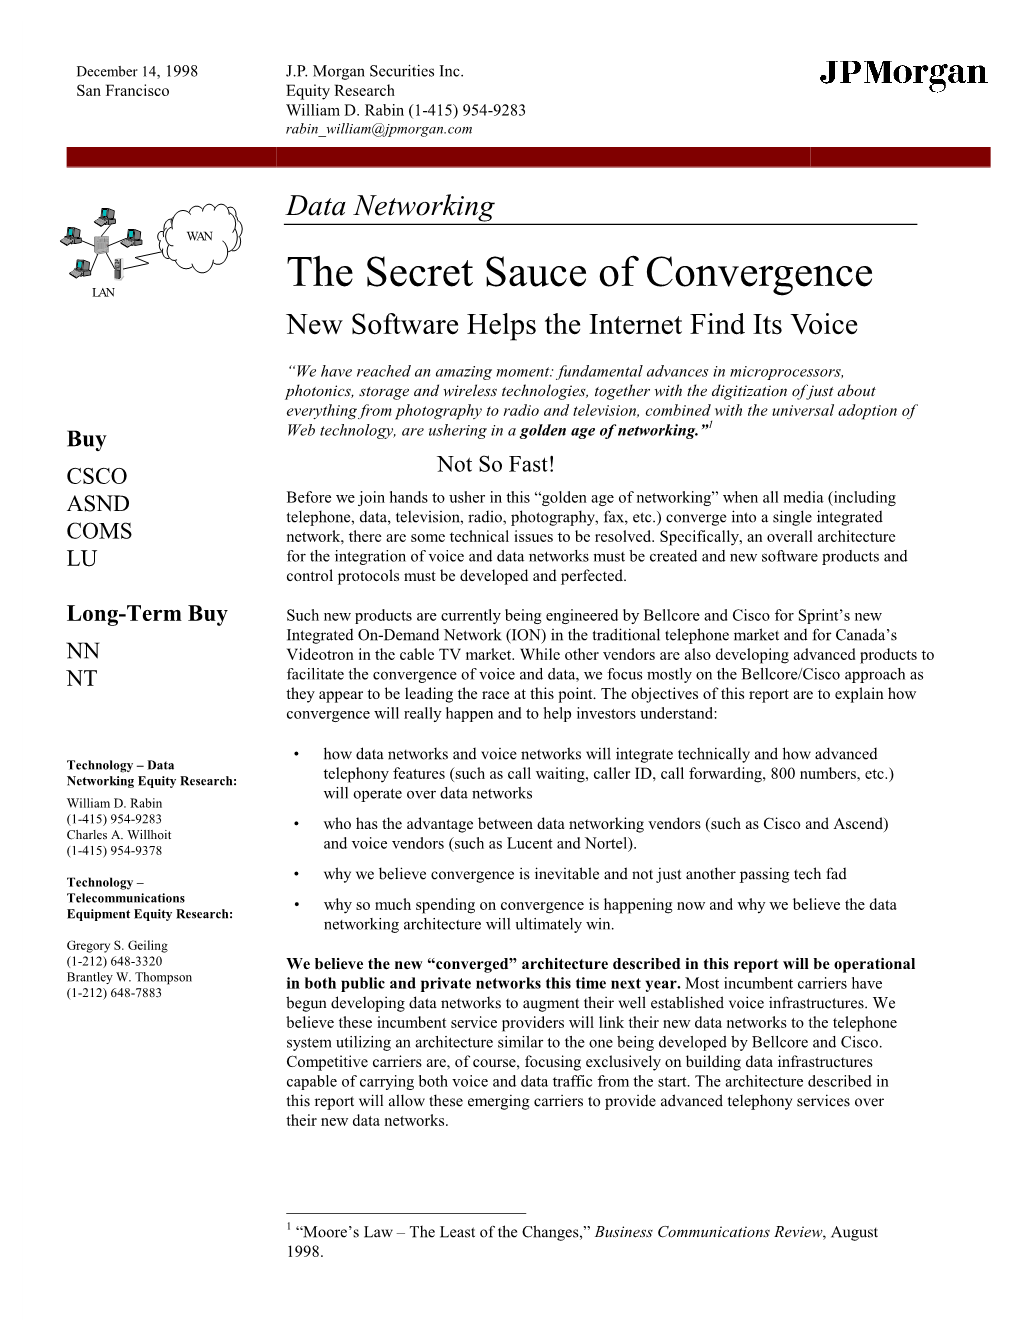 The Secret Sauce of Convergence LAN New Software Helps the Internet Find Its Voice